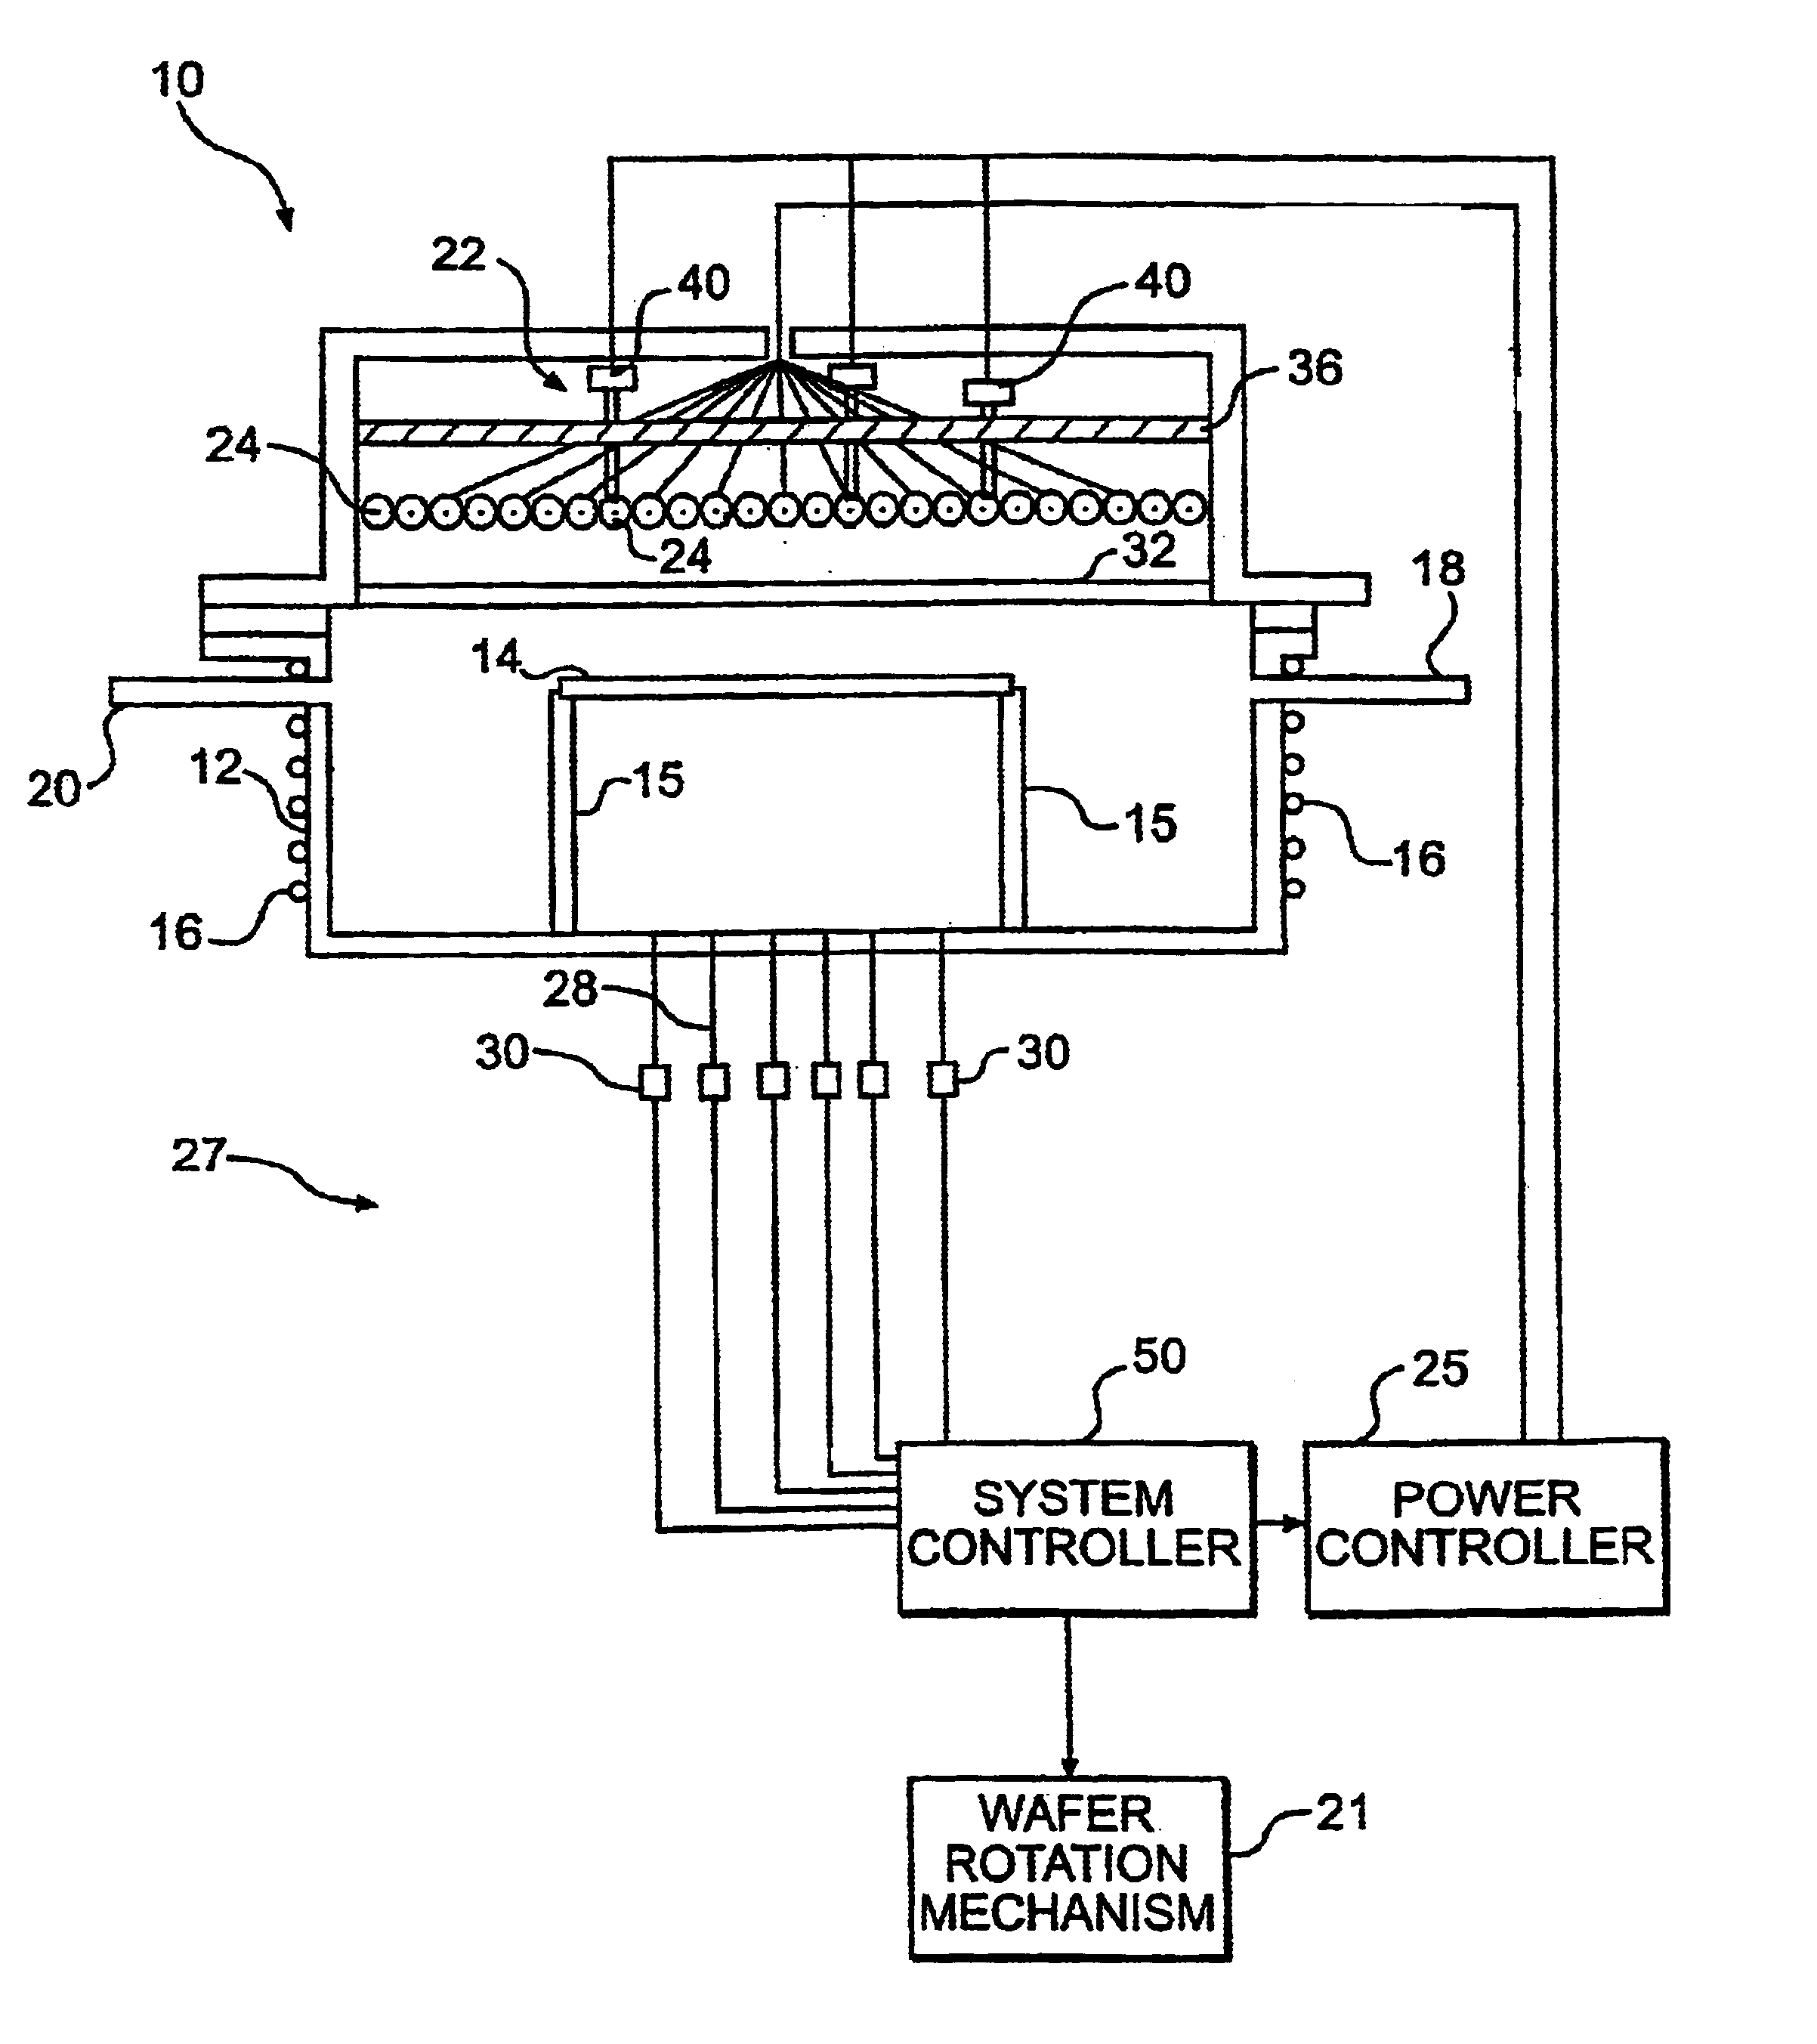 Heating configuration for use in thermal processing chambers